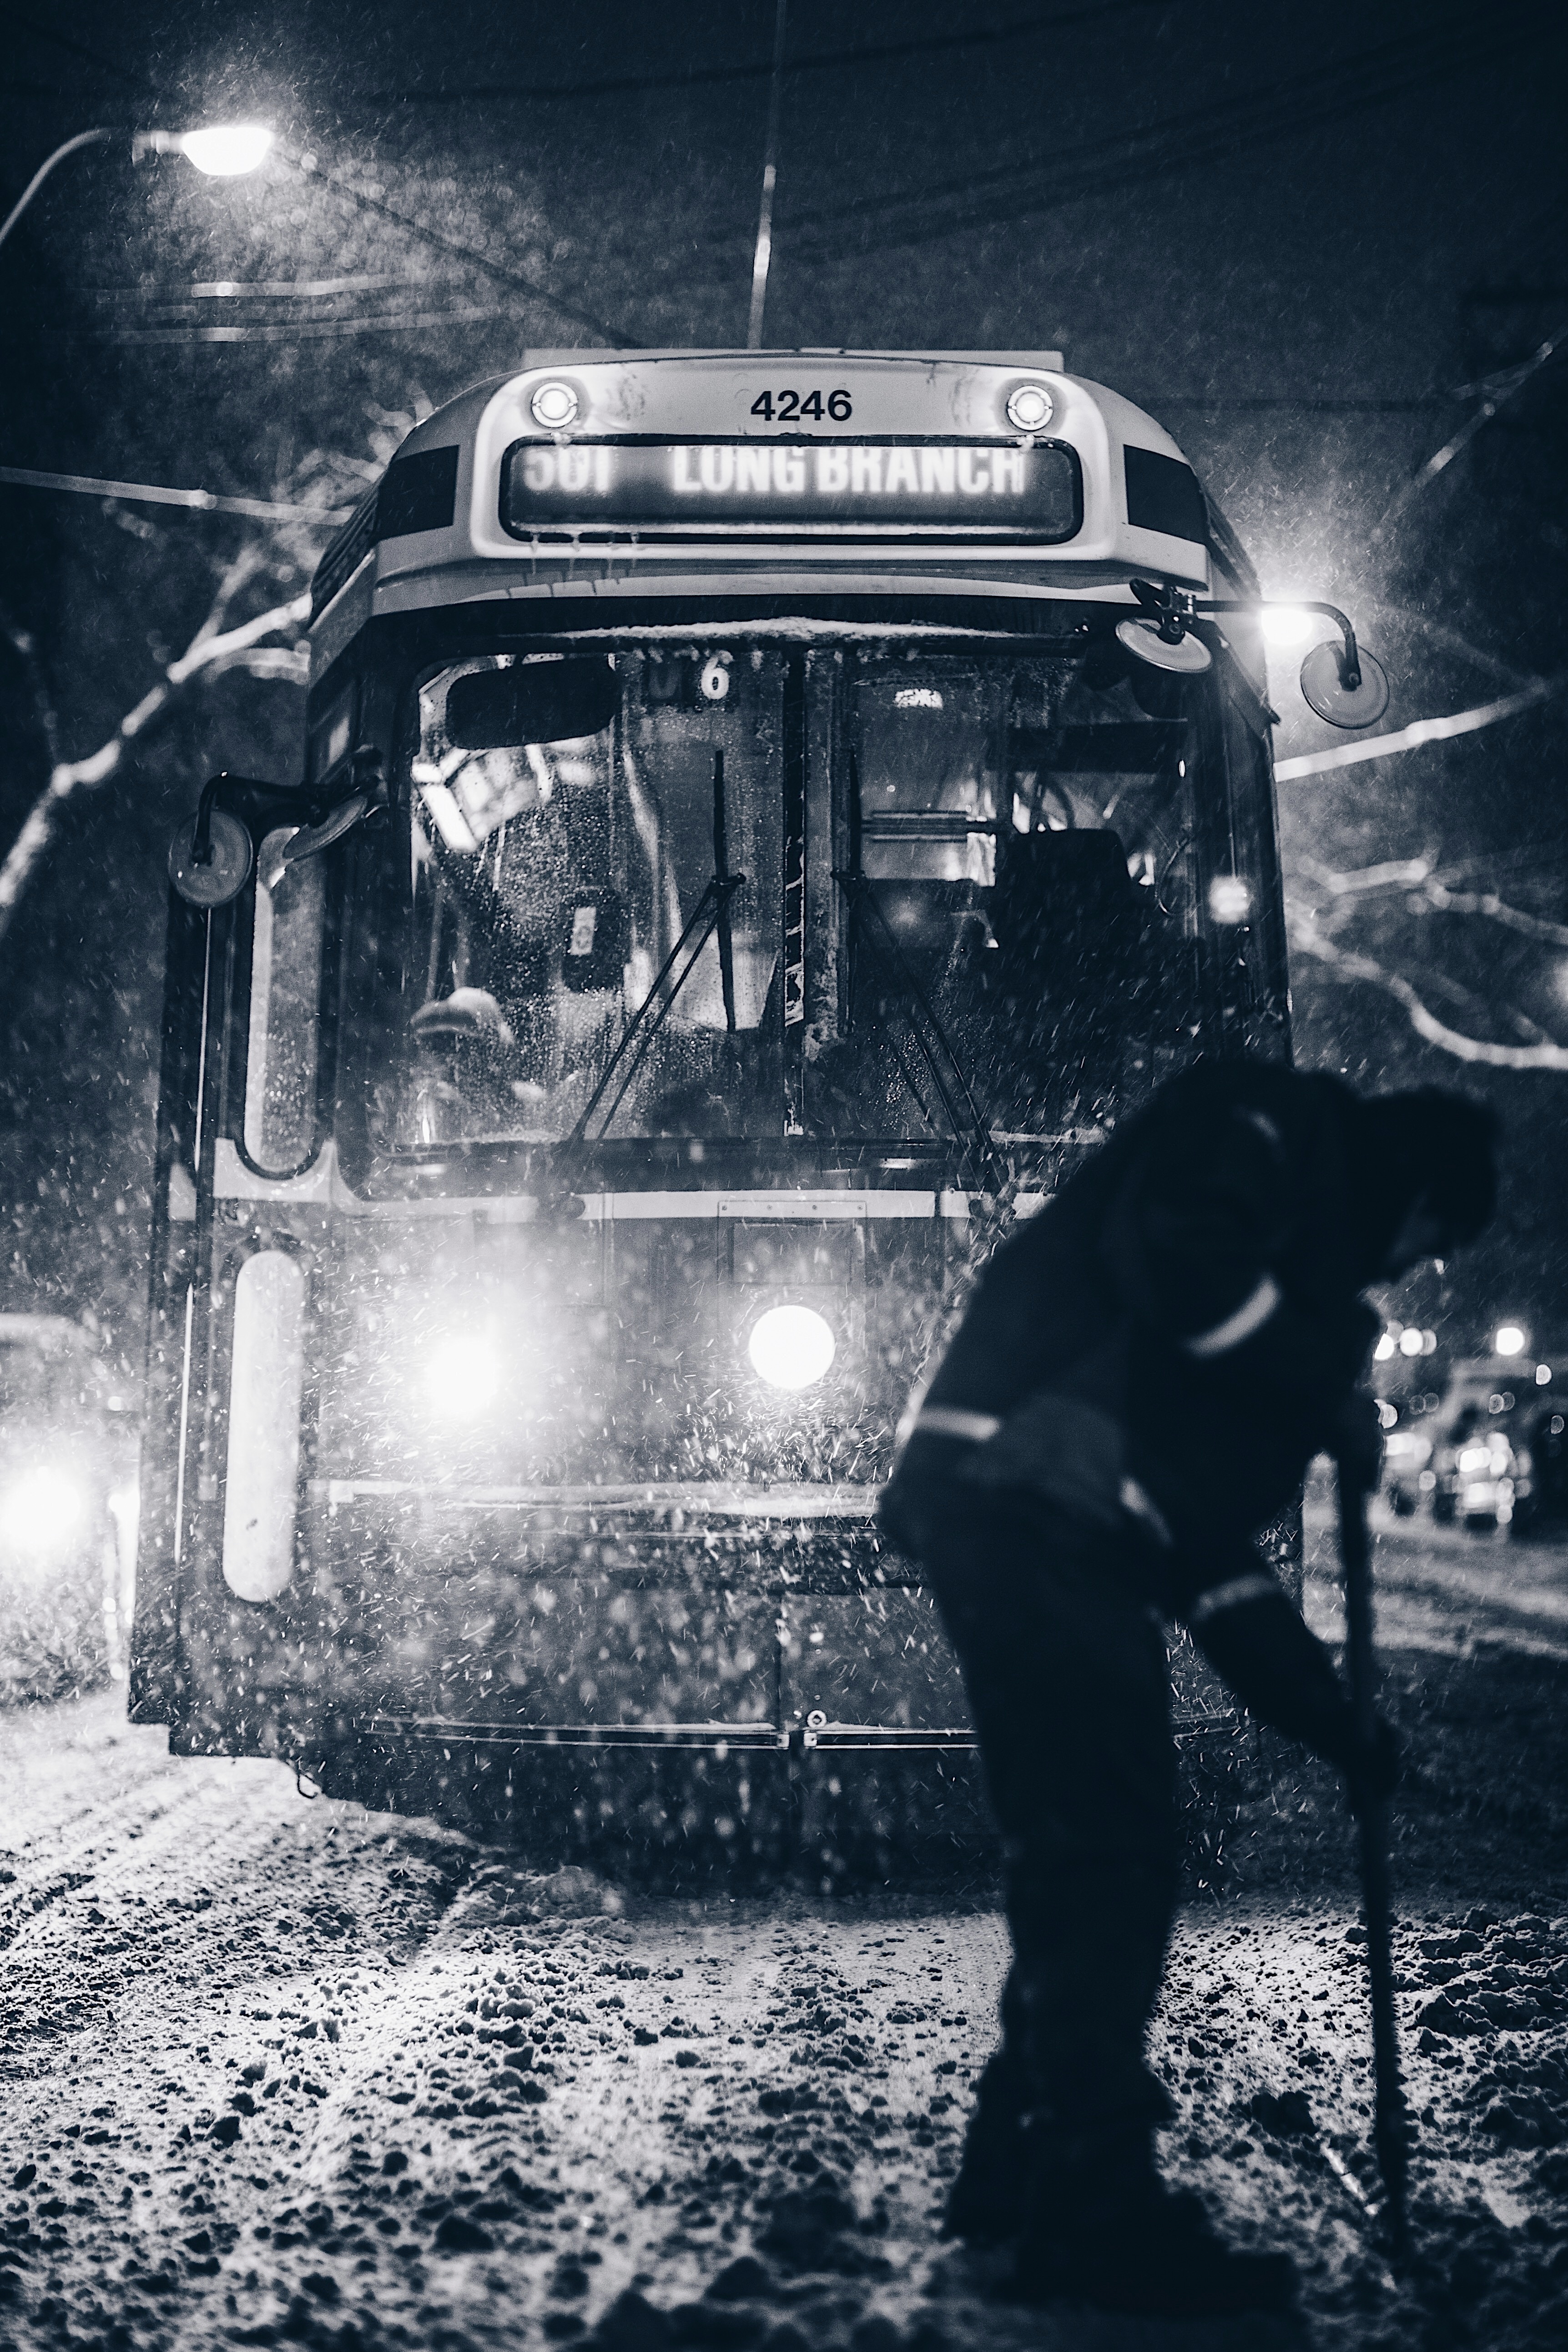 grayscale photo of person in front of tram shoveling snow during nighttime